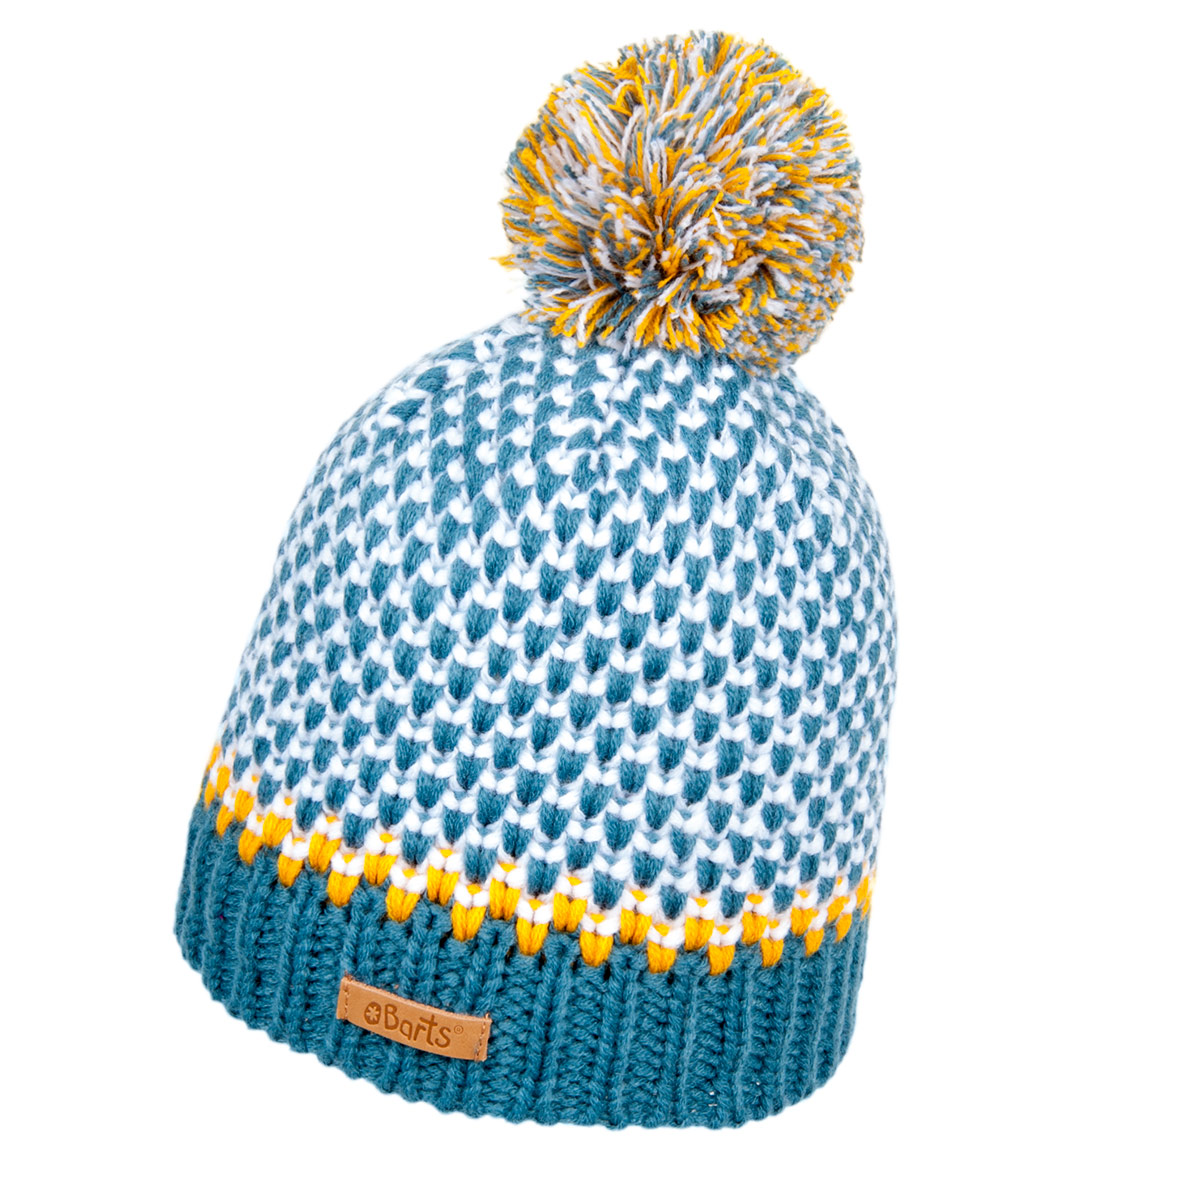 lining and warm pompom BARTS hat with kids